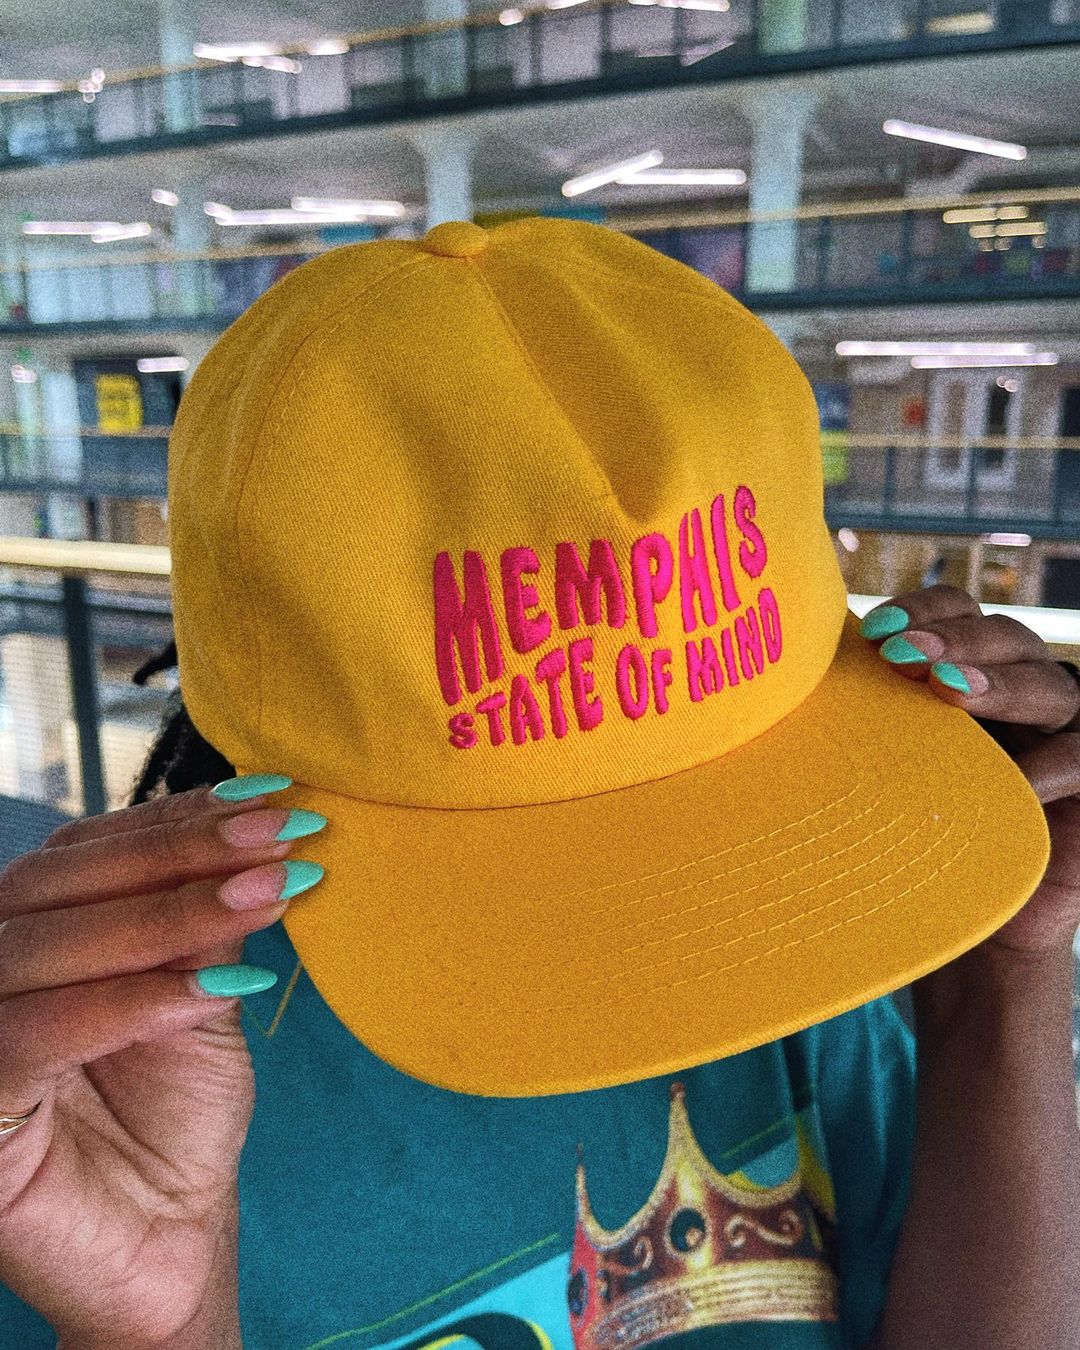 A person holding a MEMPHIS STATE OF MIND HAT from the Choose901 Merch Shop.